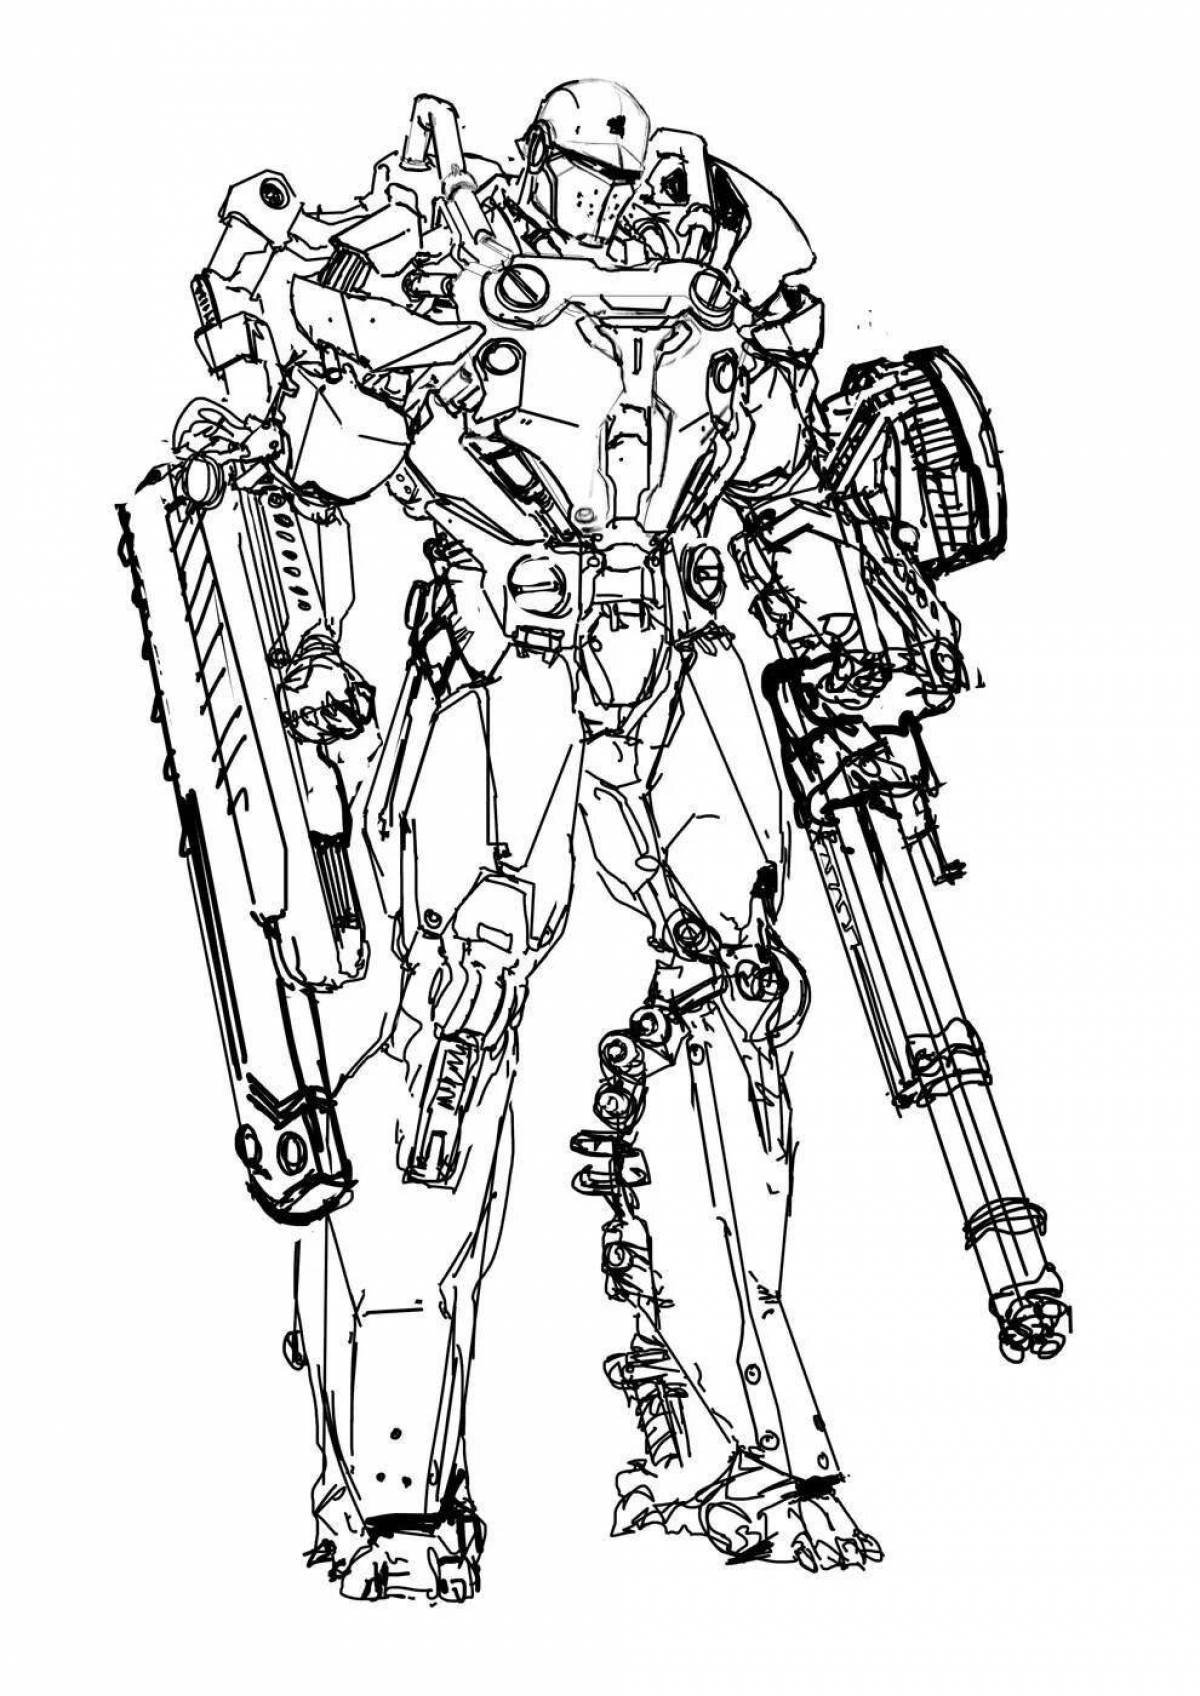 Animated terminator coloring book for kids